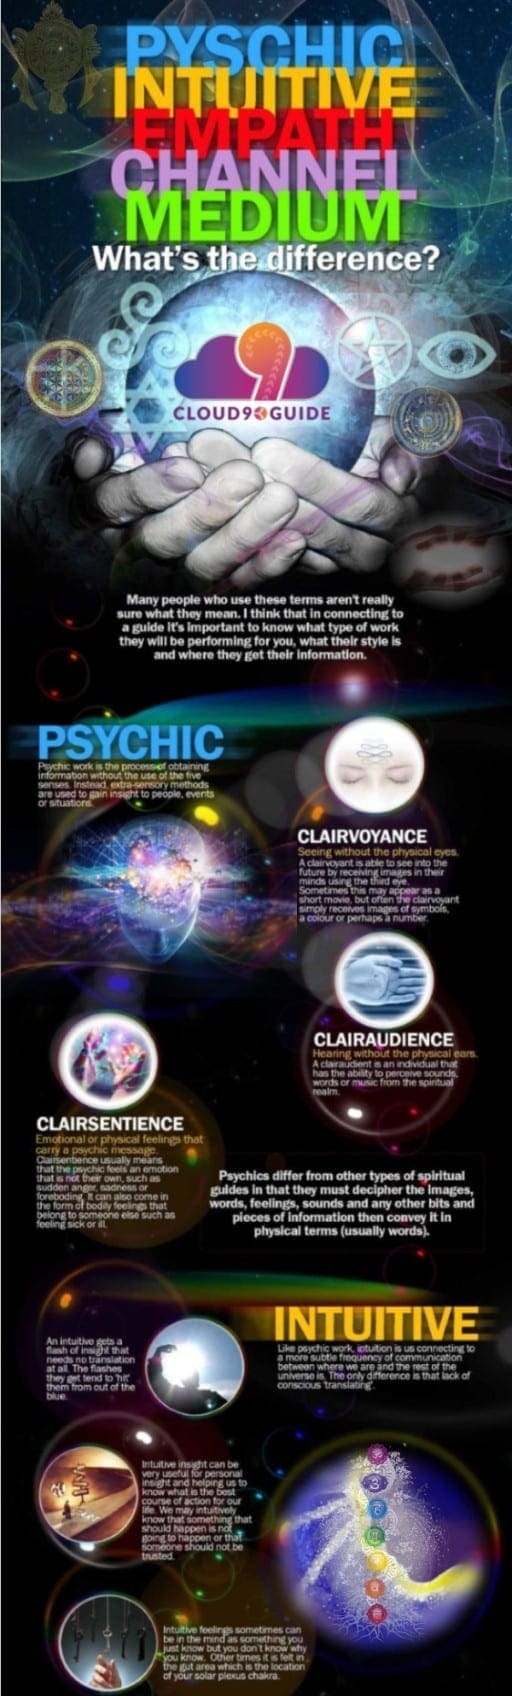 About Psychics, Intuitives, Empaths, Channels, and Mediums; What’s the Difference - Cloud 9 Guide